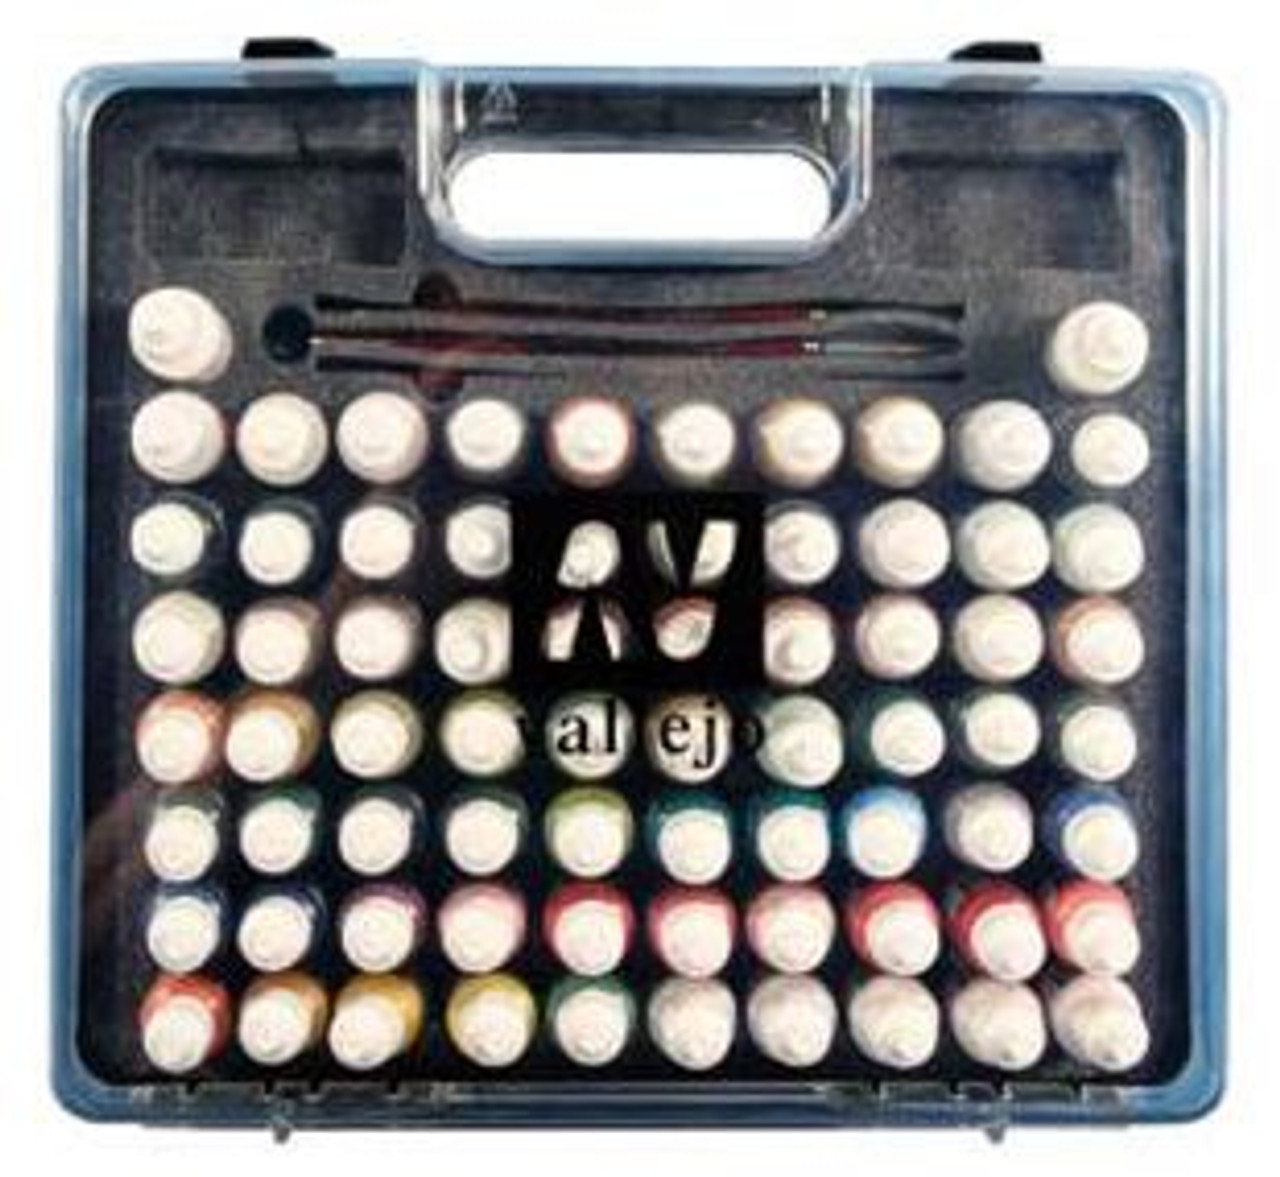 Vallejo Paint Game Color Paint Set in Plastic Storage Case (72 Colors &  Brushes) 